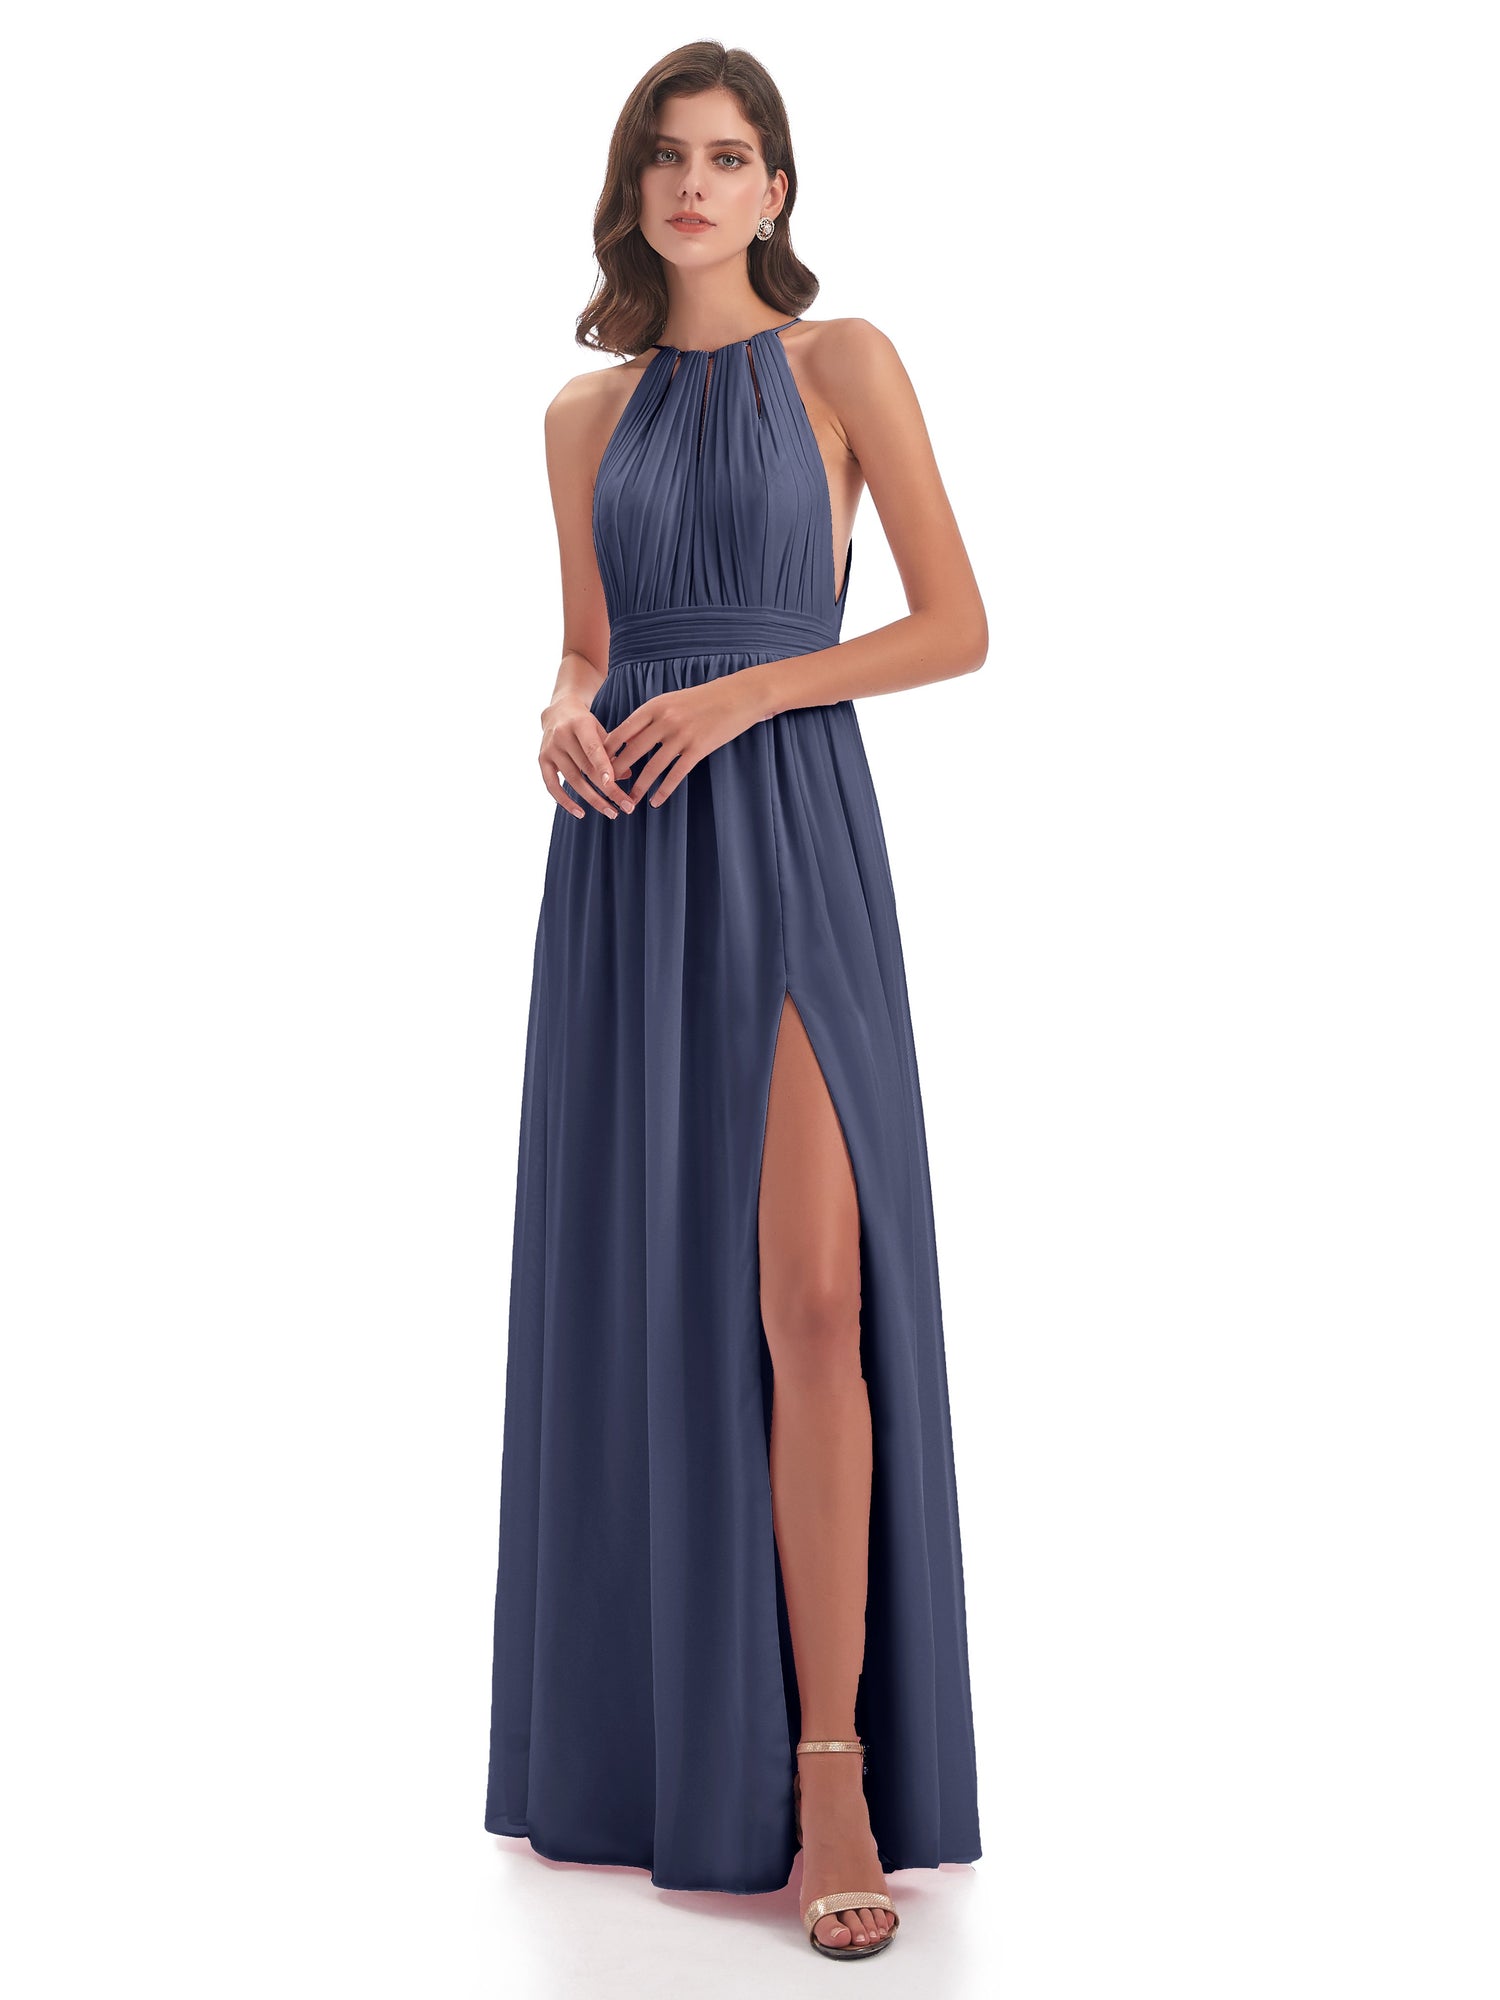 Bridesmaid Dresses With Slits